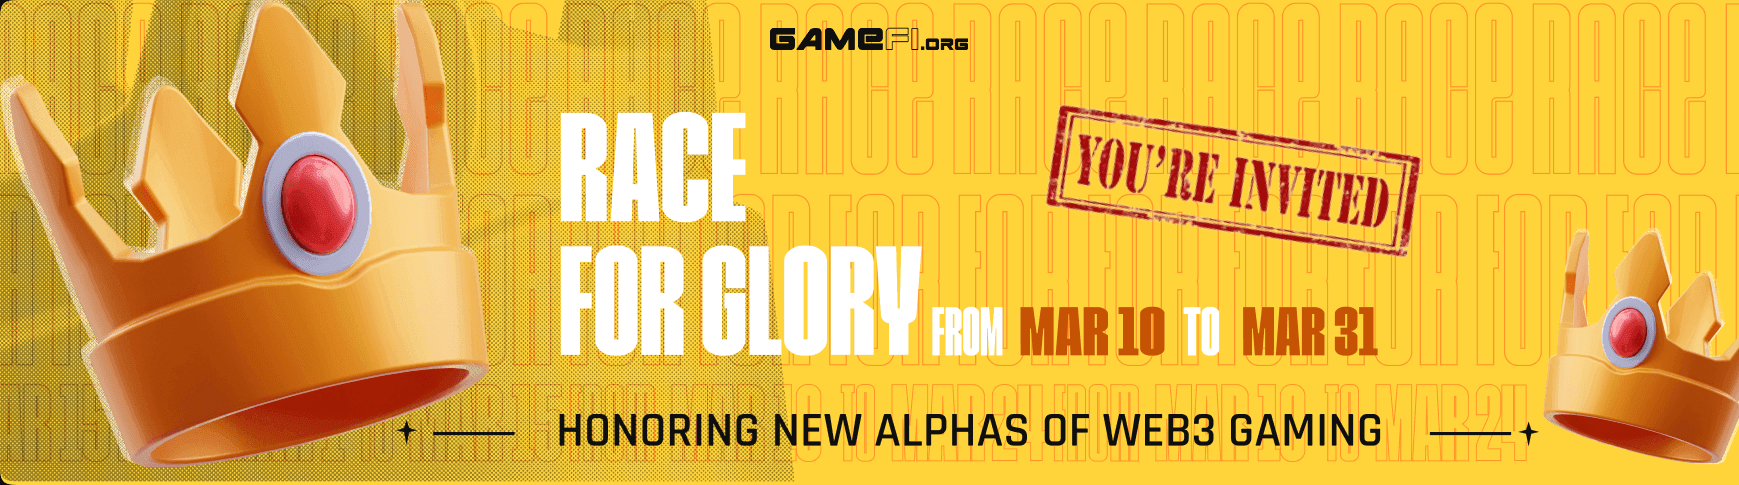 RACE FOR GLORY: Glorious Award for New Alphas of Web3 Gaming!